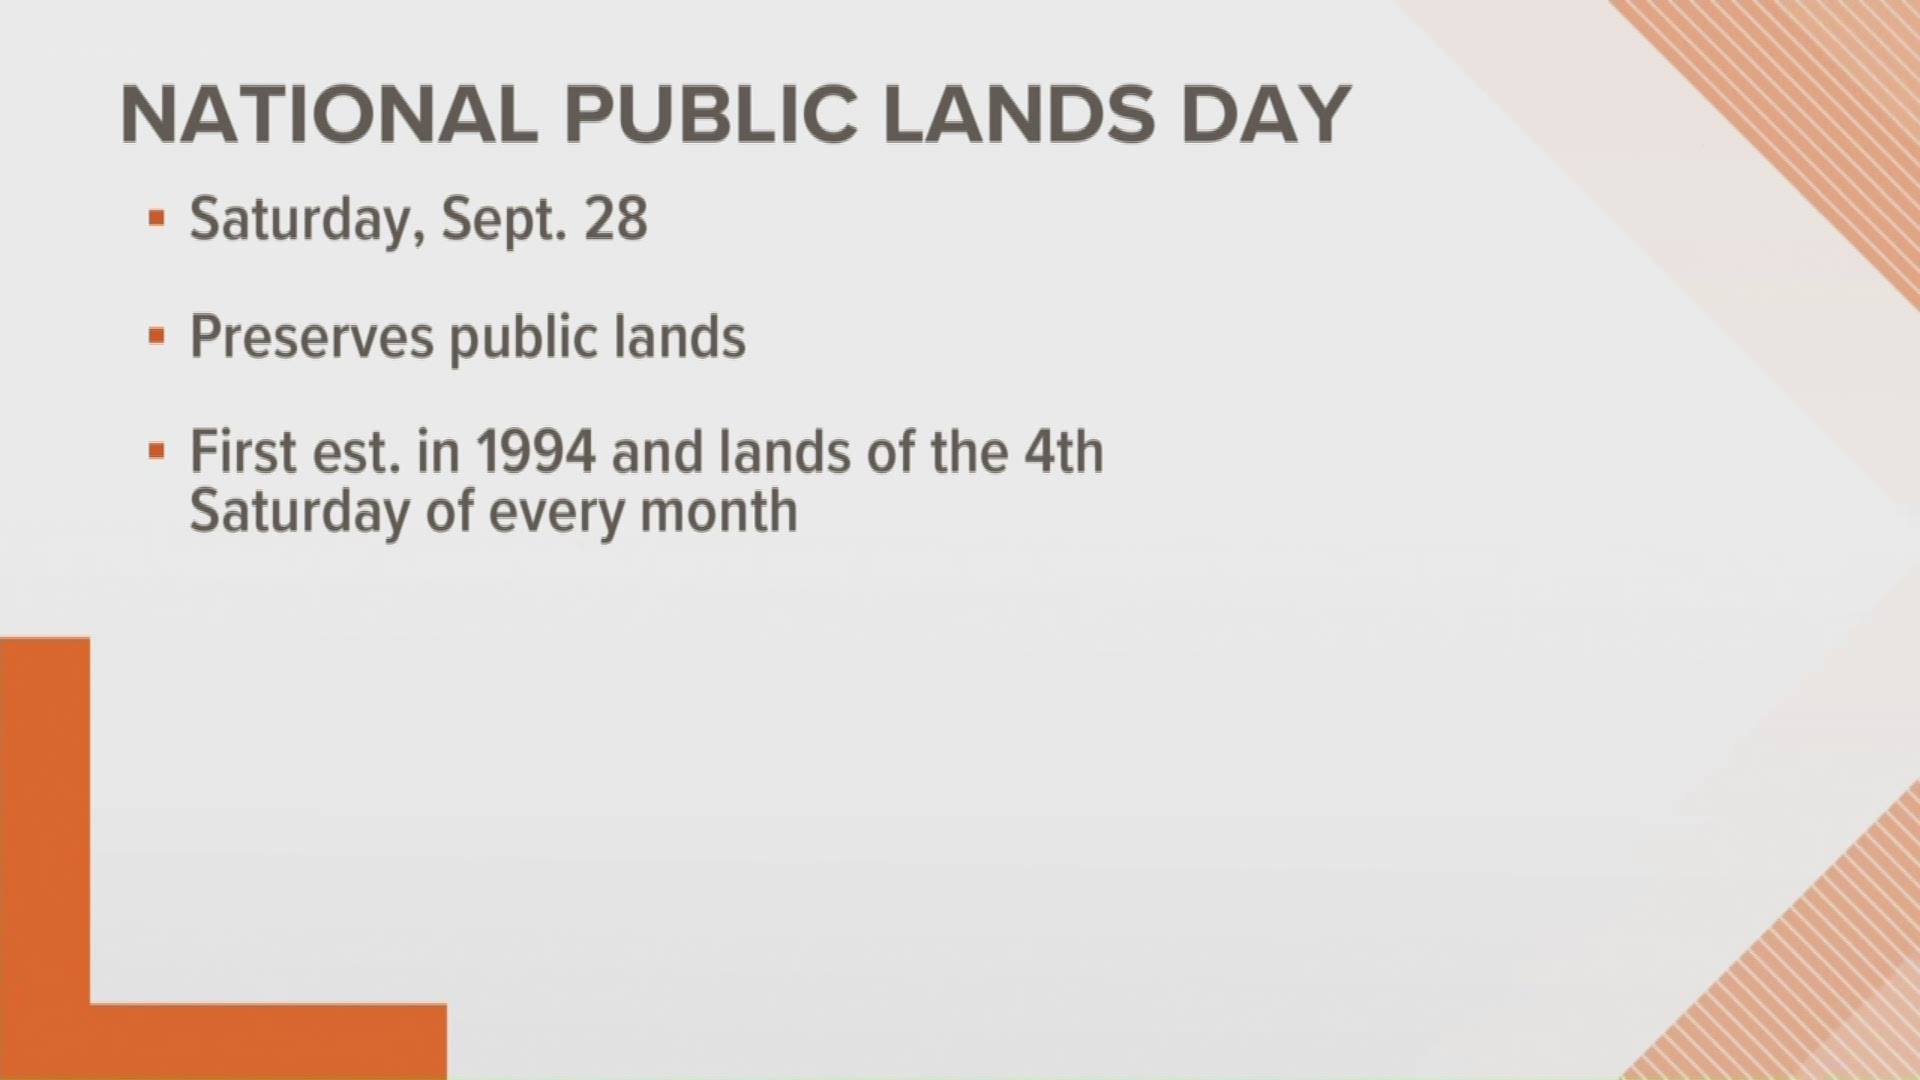 Trail repair and cleanup activities are planned across the country on Sept. 28 for National Public Lands Day.